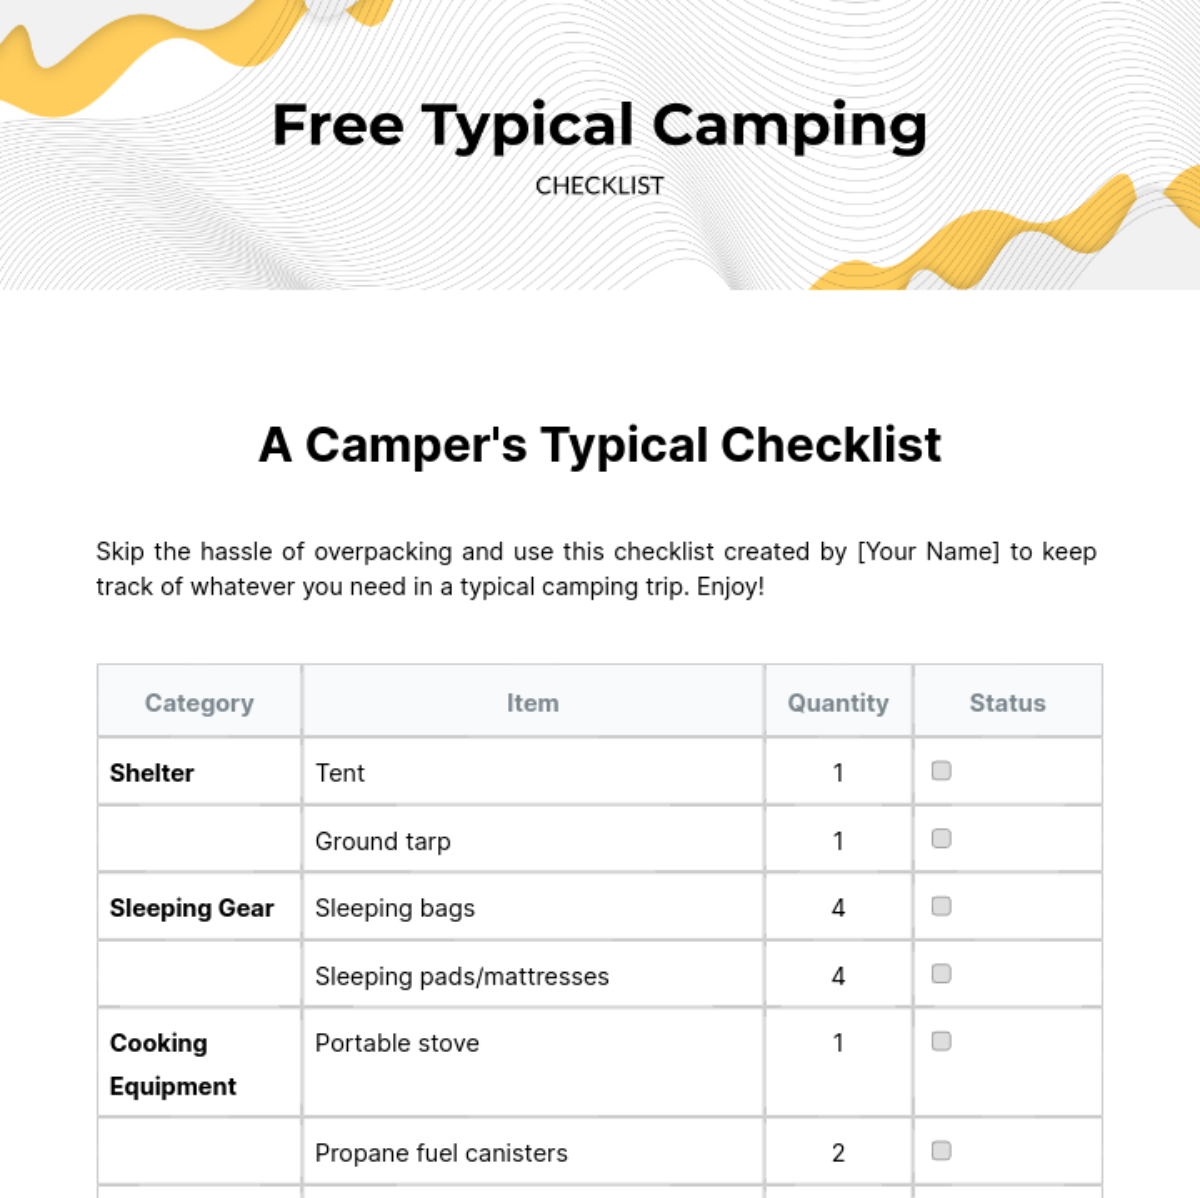 Free Typical Camping Checklist Template